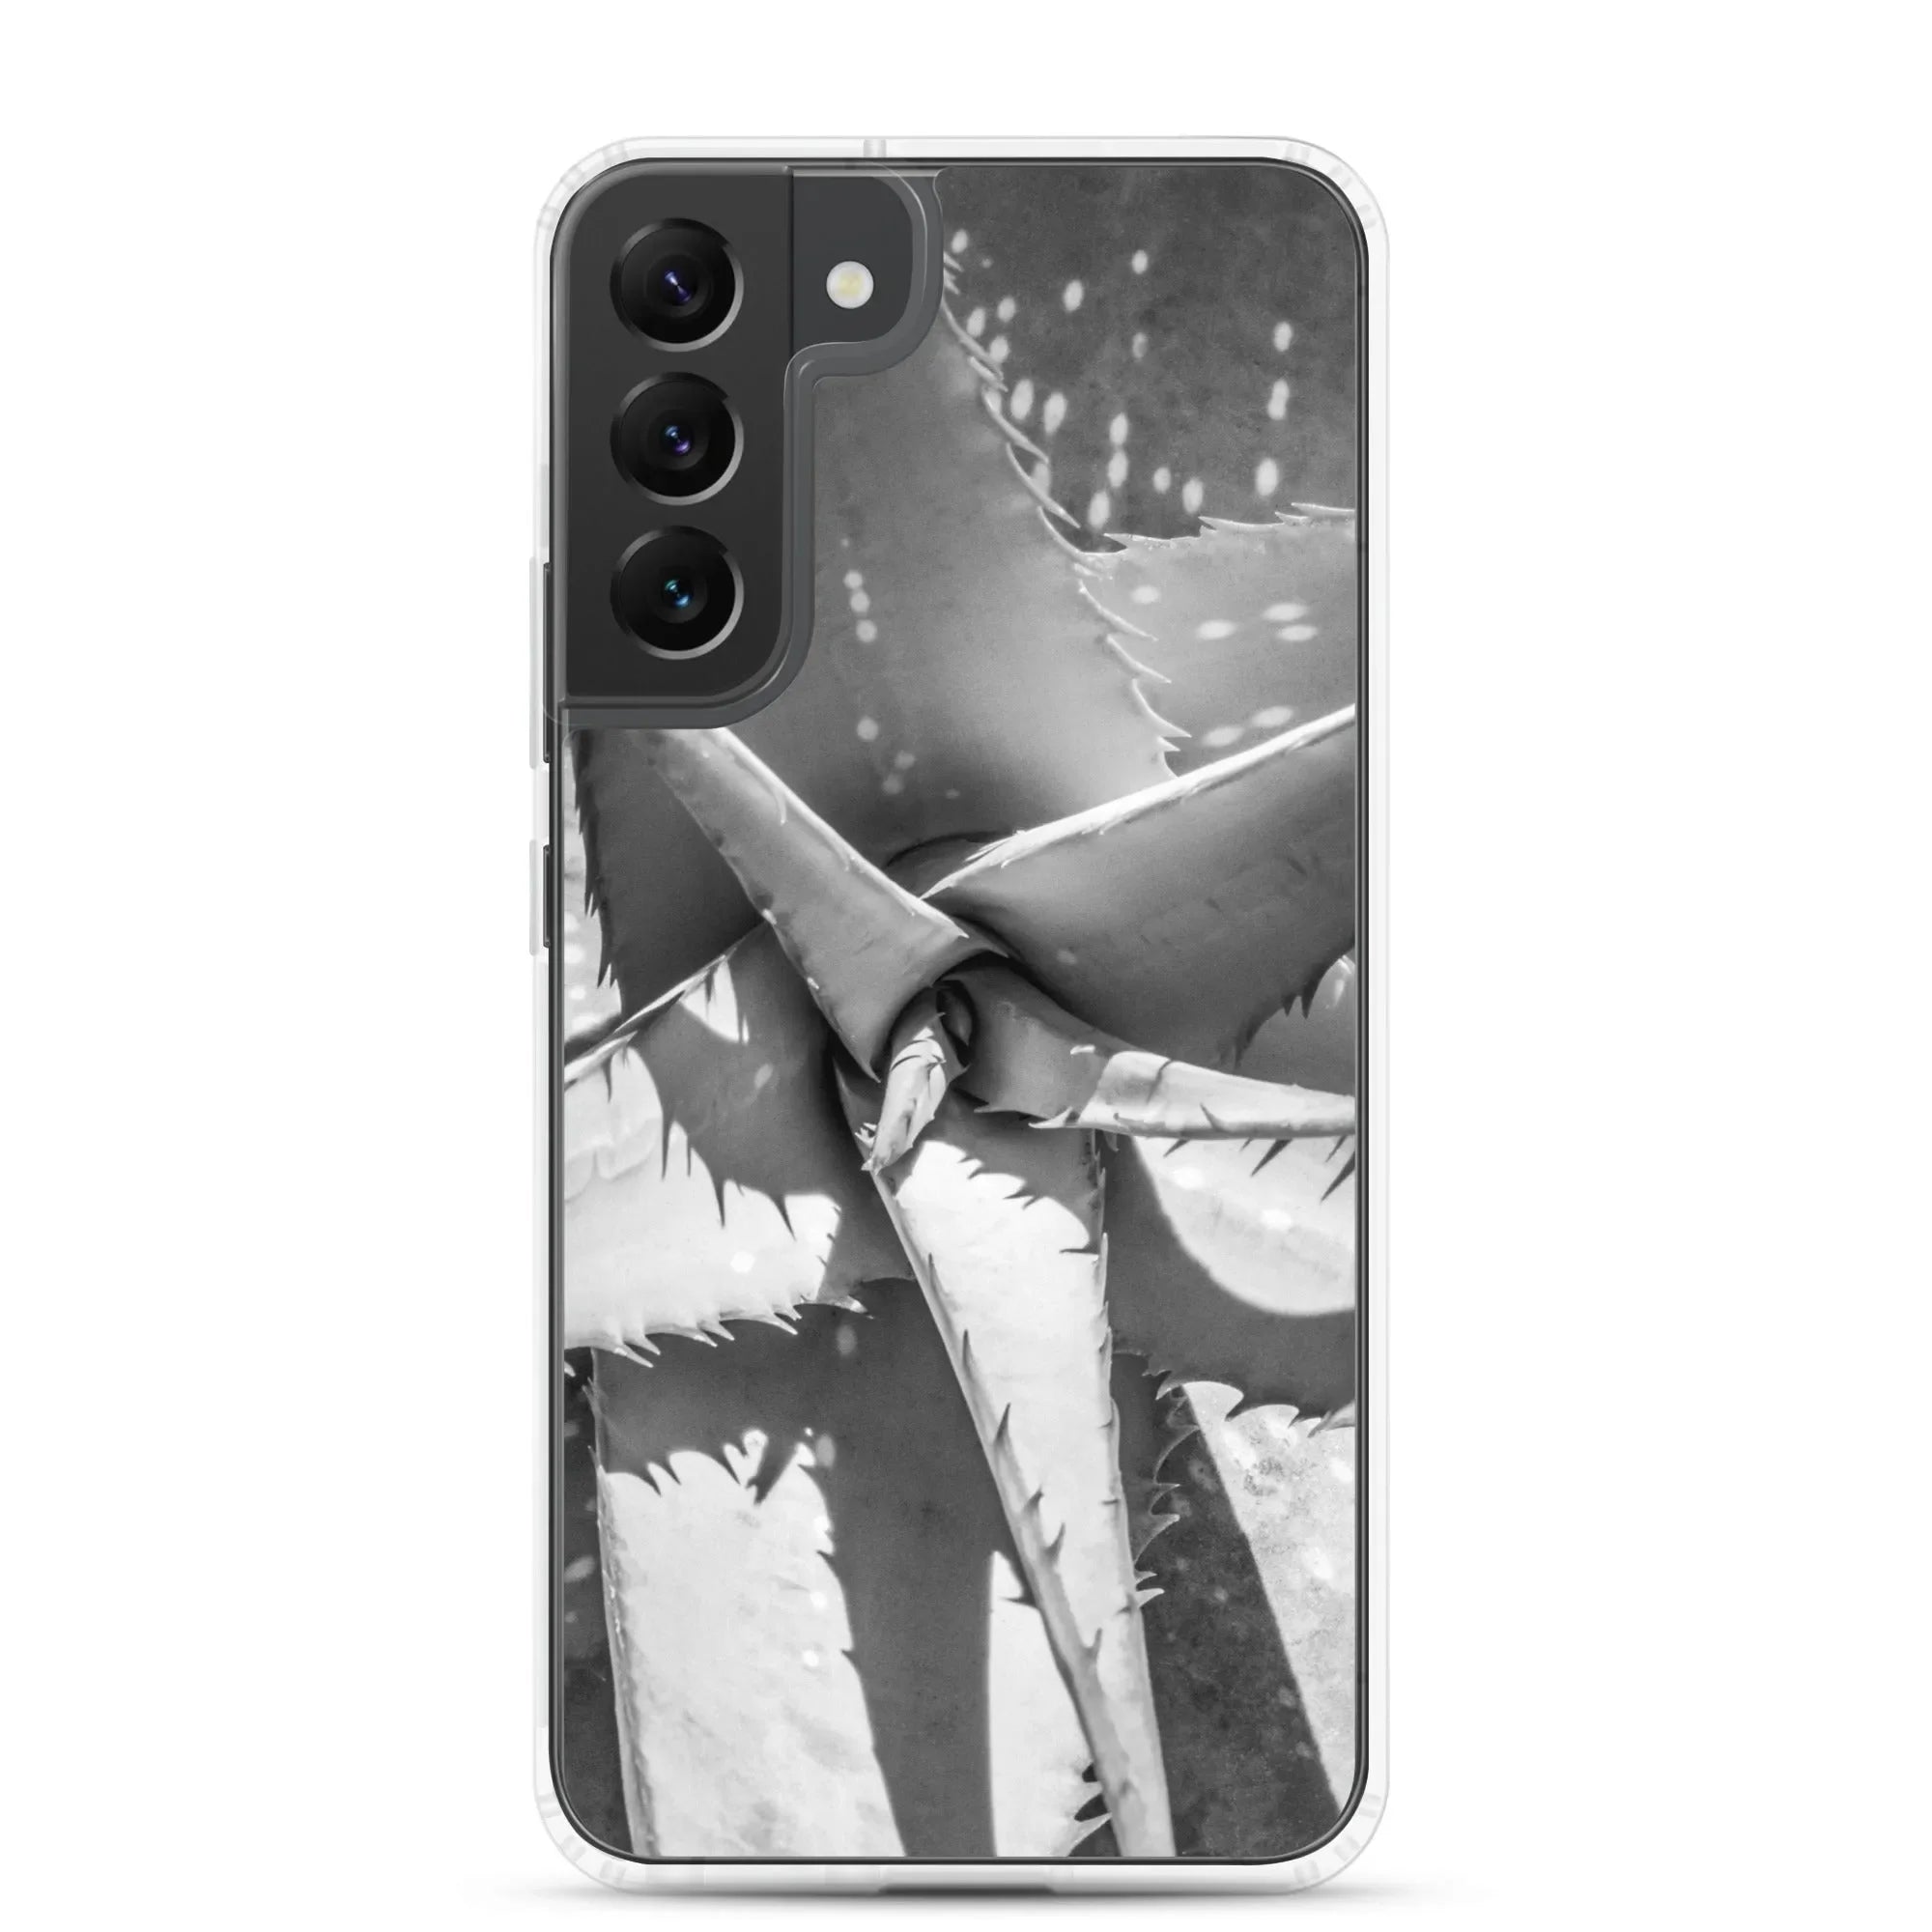 Starry-eyed Samsung Galaxy Case - Black And White - Samsung Galaxy S22 Plus - Mobile Phone Cases - Aesthetic Art